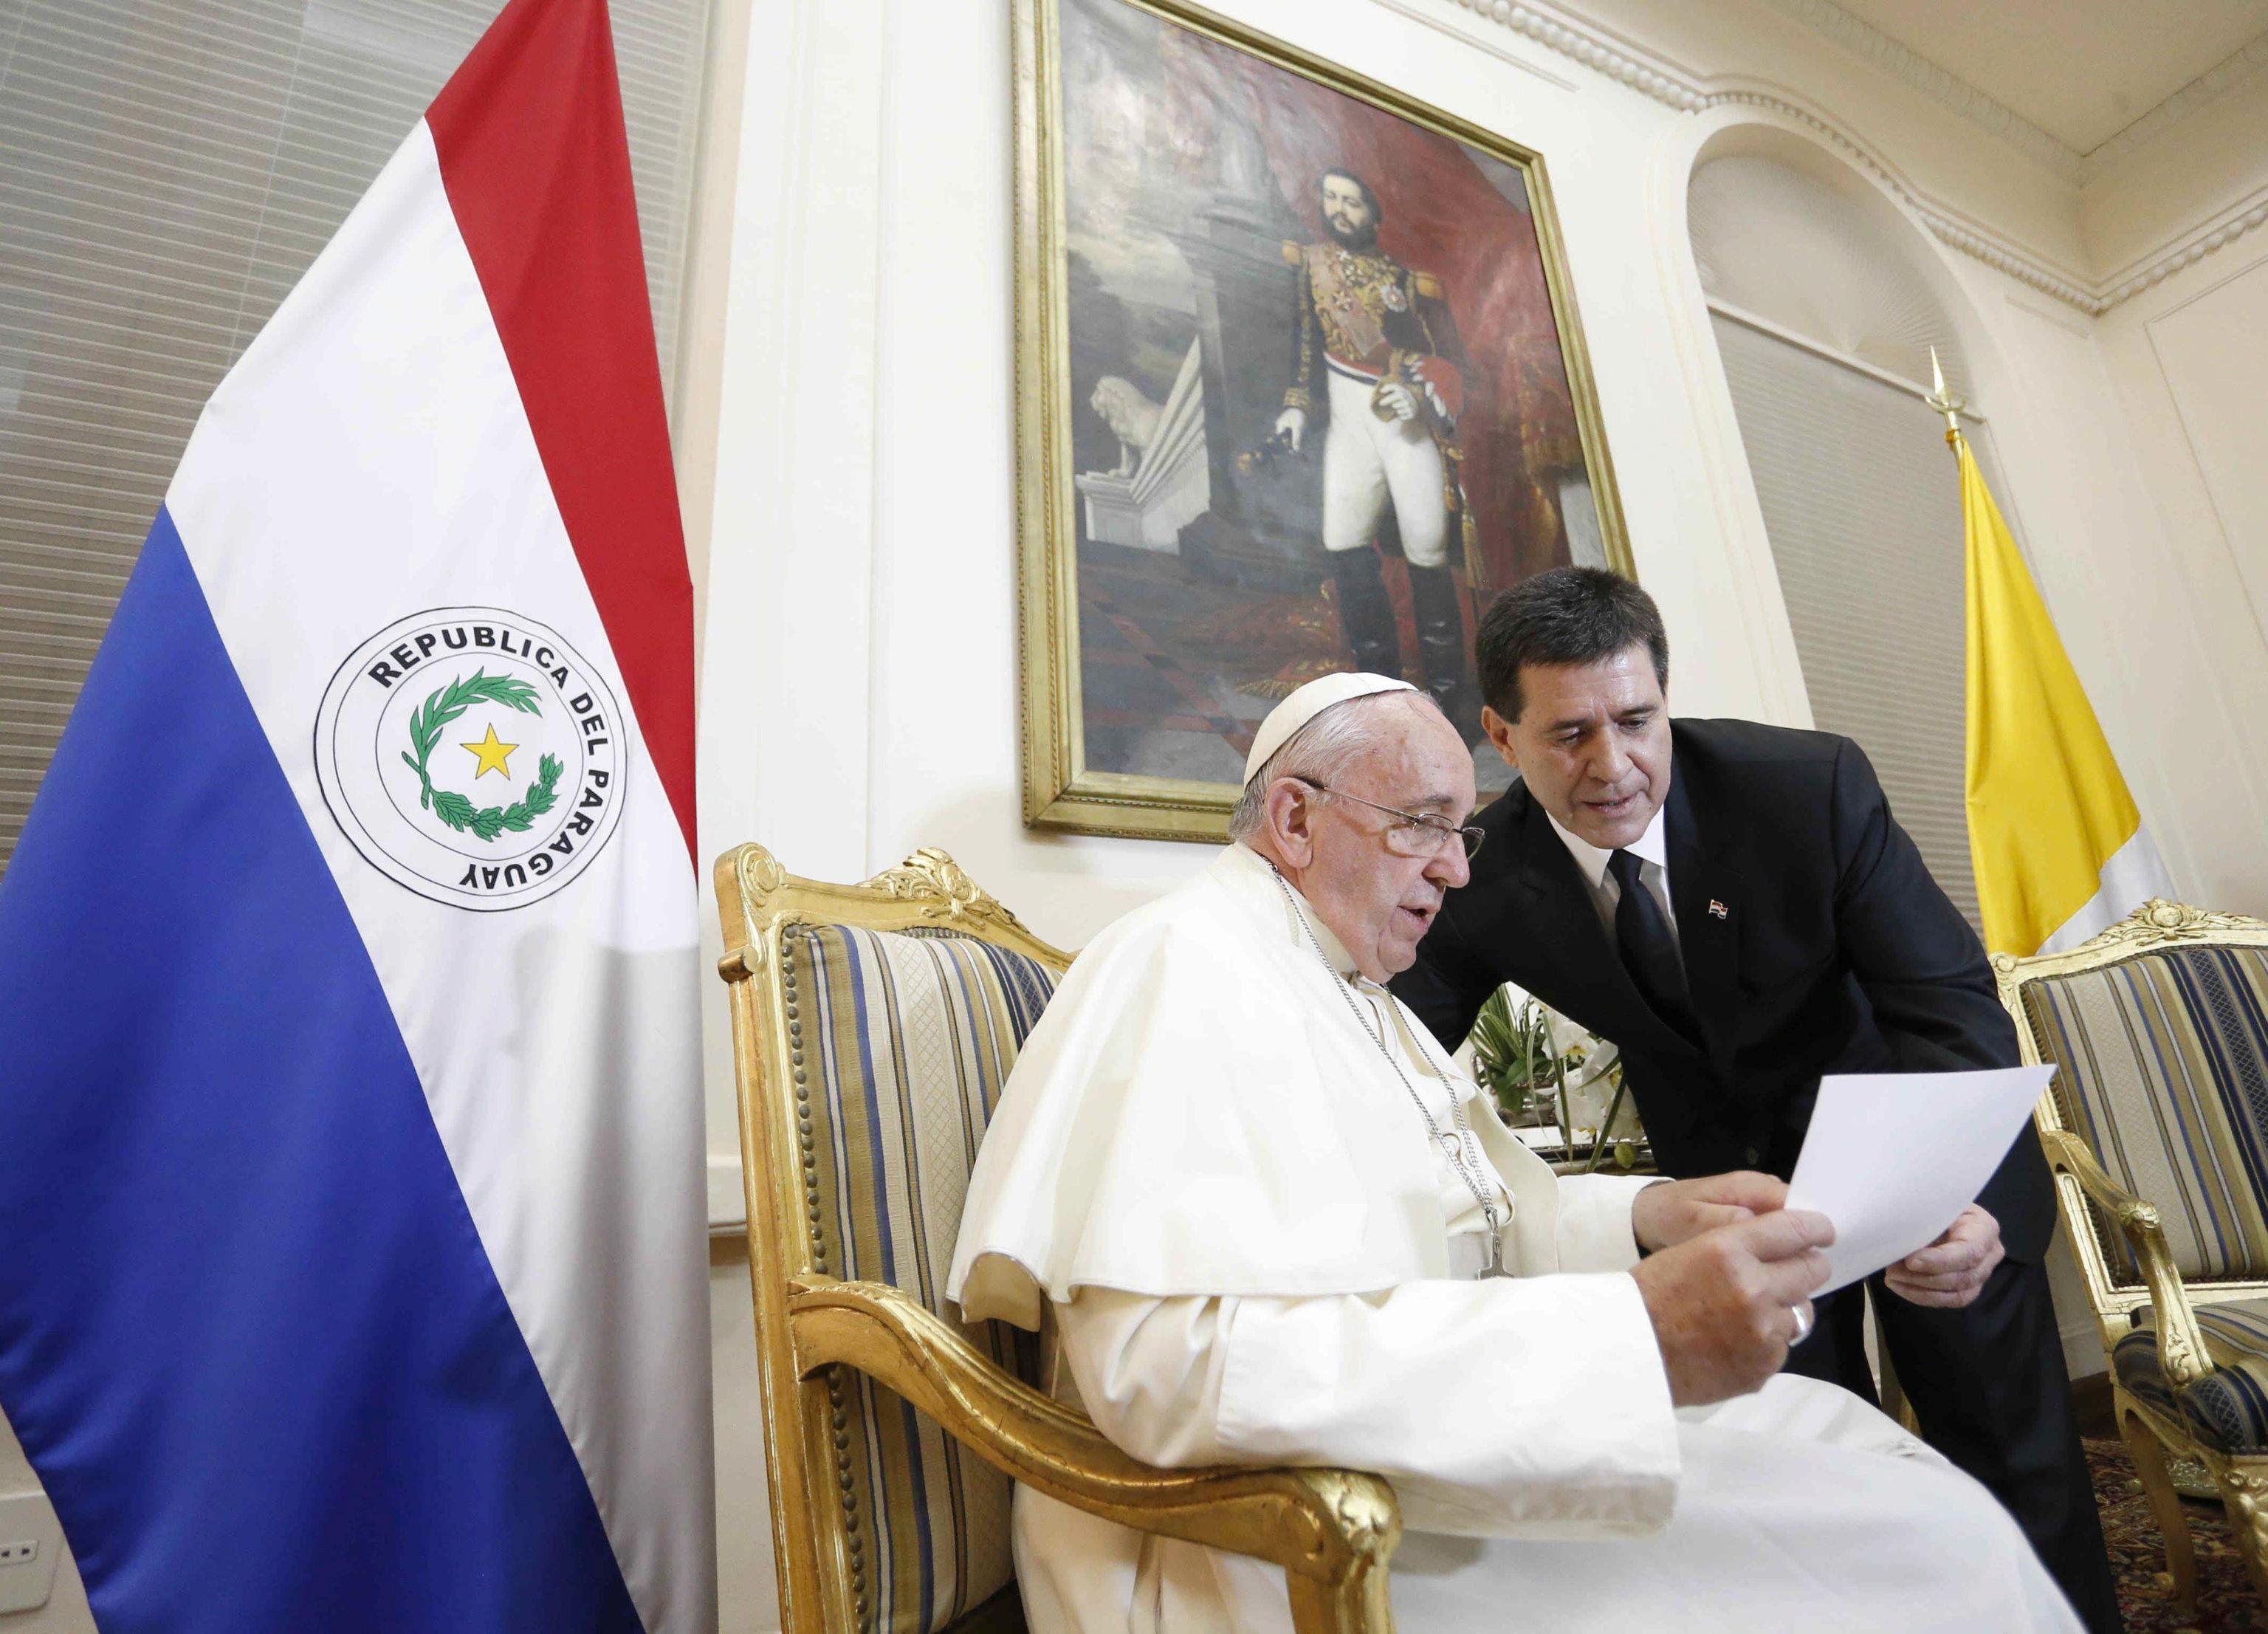 Pope Francis during his courtesy visit to president Horacio Cartes